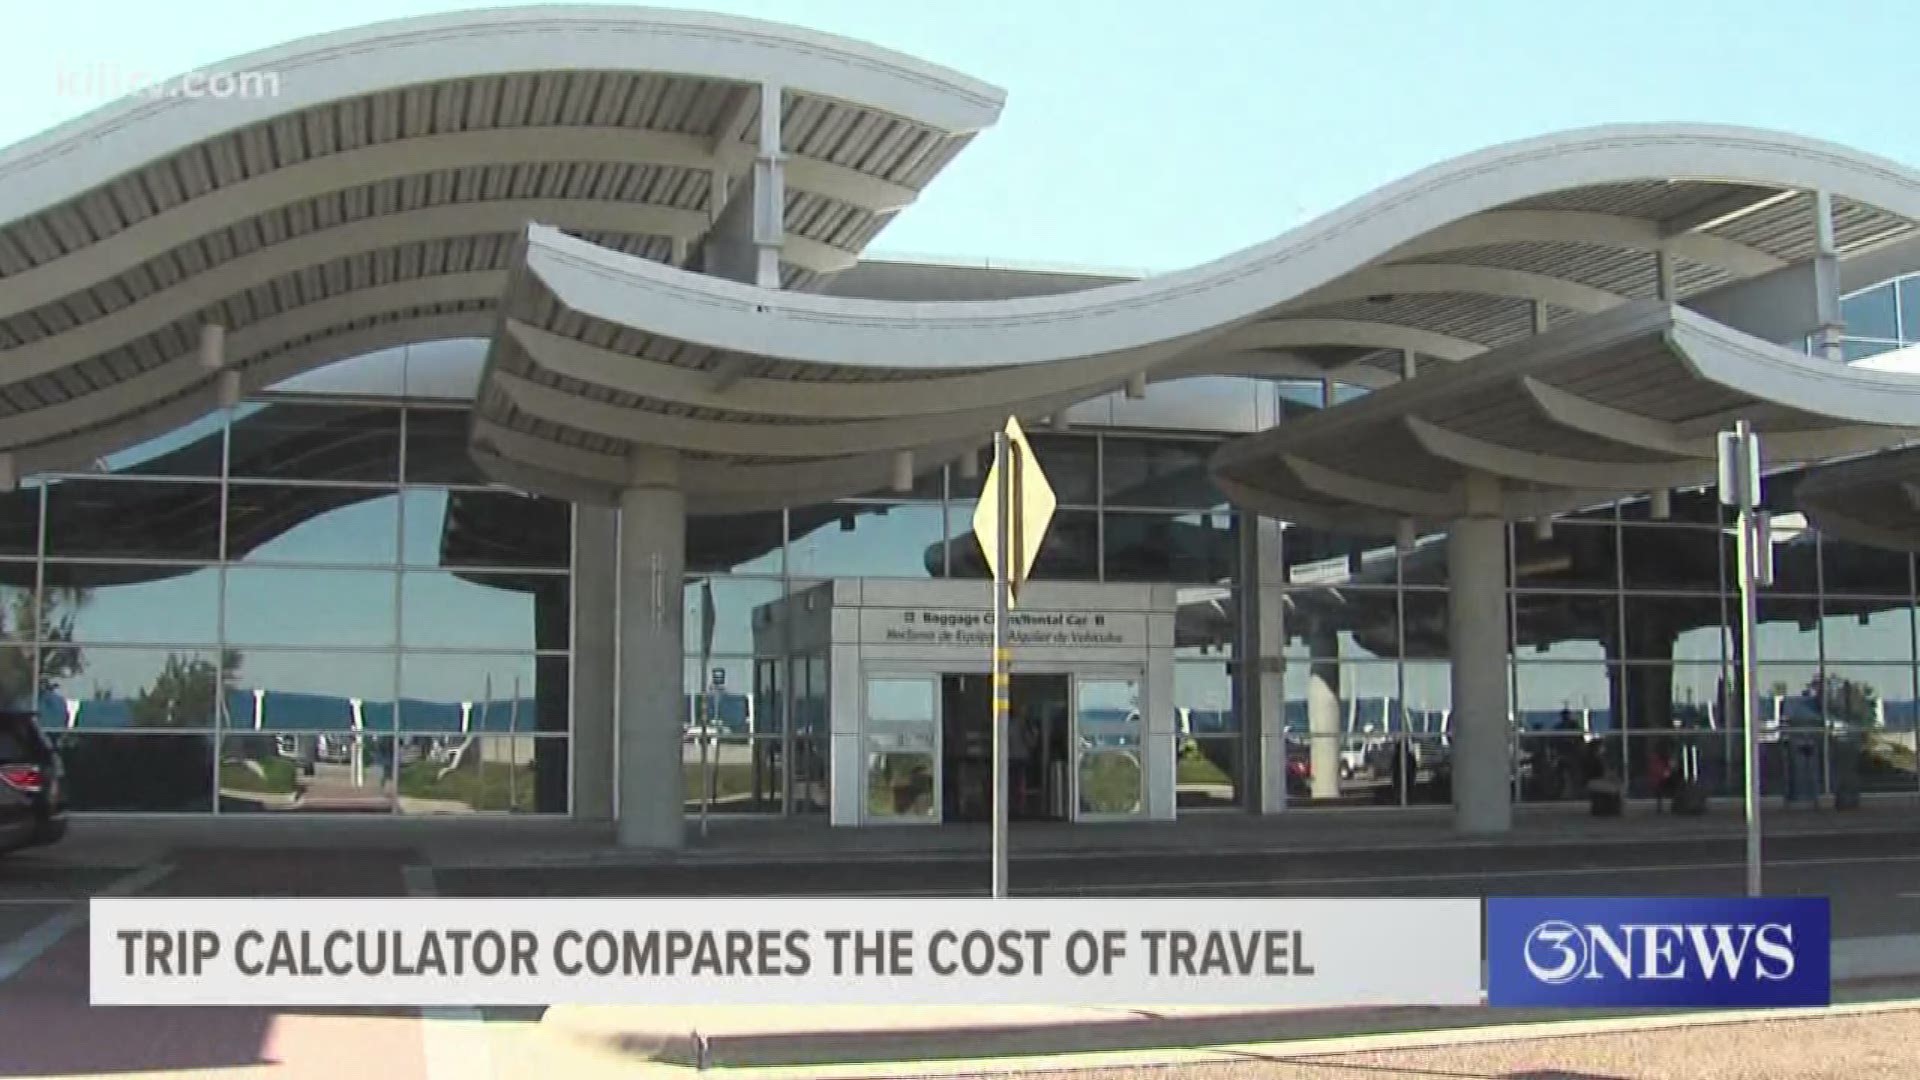 The Corpus Christi International Airport is reaching out to travelers online with a new webtool that is supposed to show the true cost of travel.